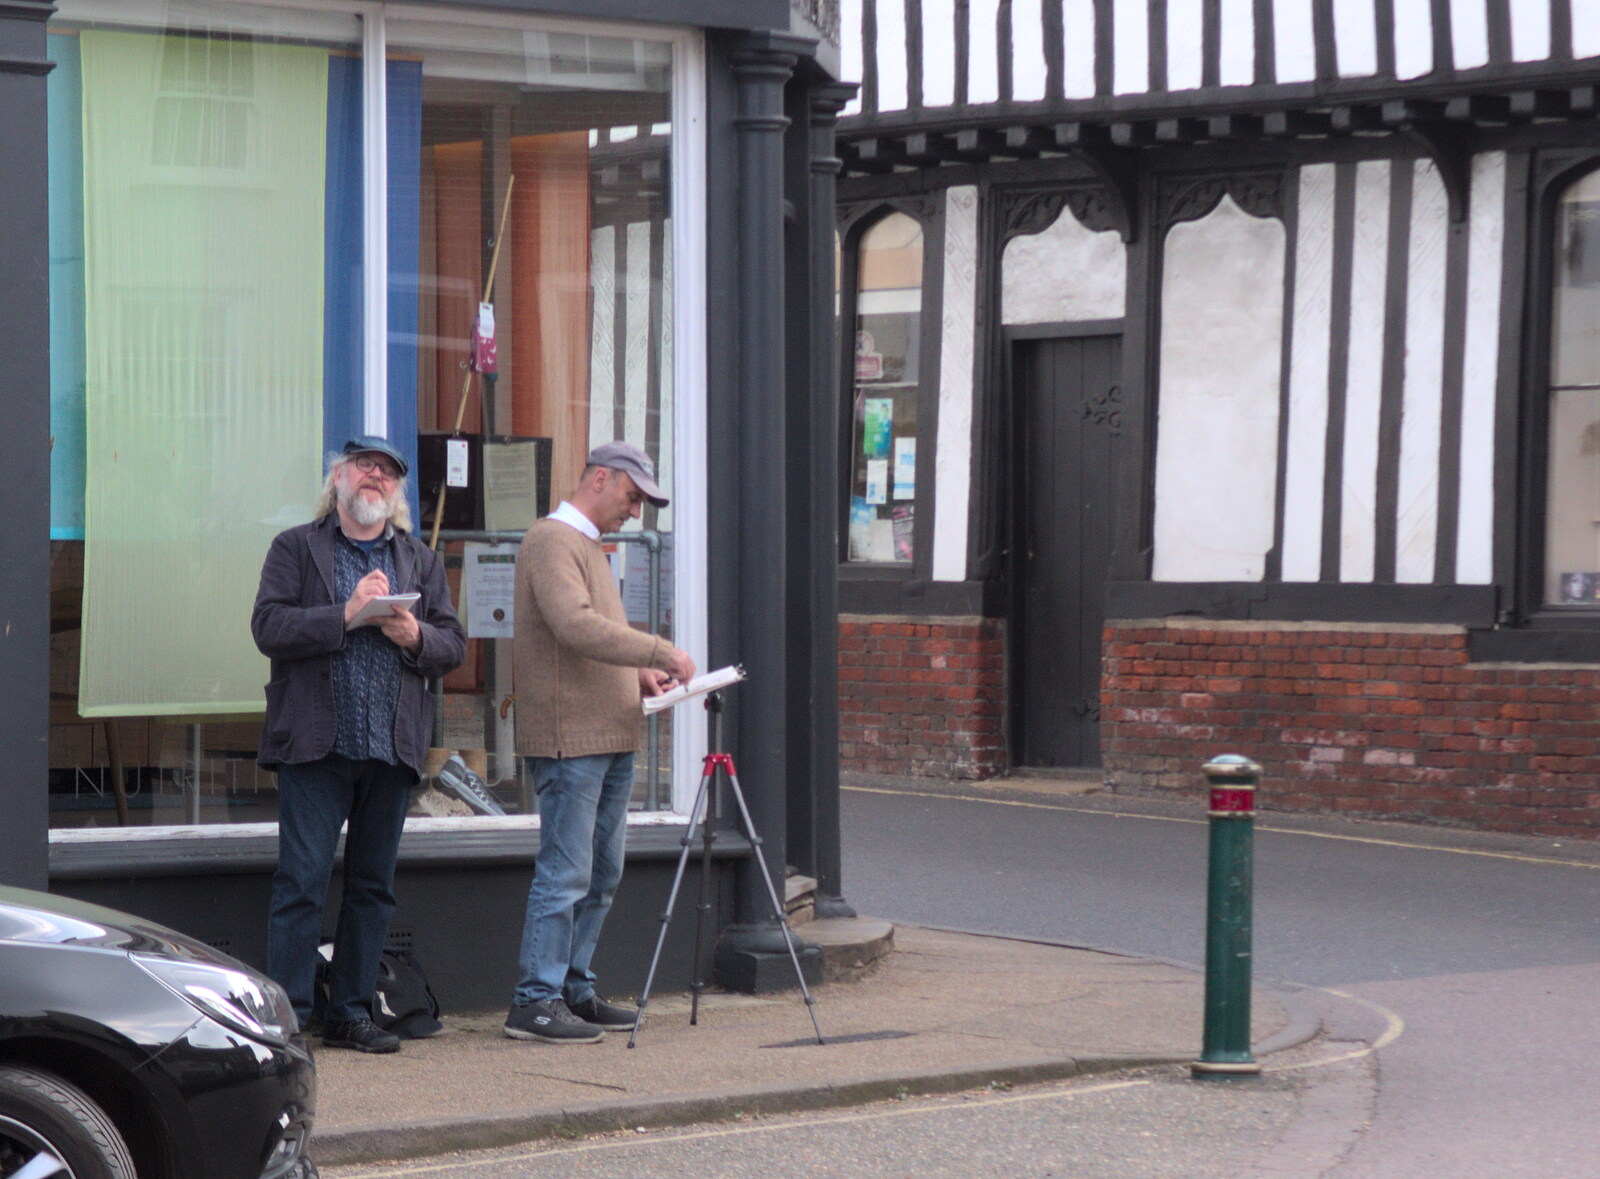 Painters at the end of Church Street from An April Miscellany: Snow and Cycling, Suffolk and London - 4th April 2019